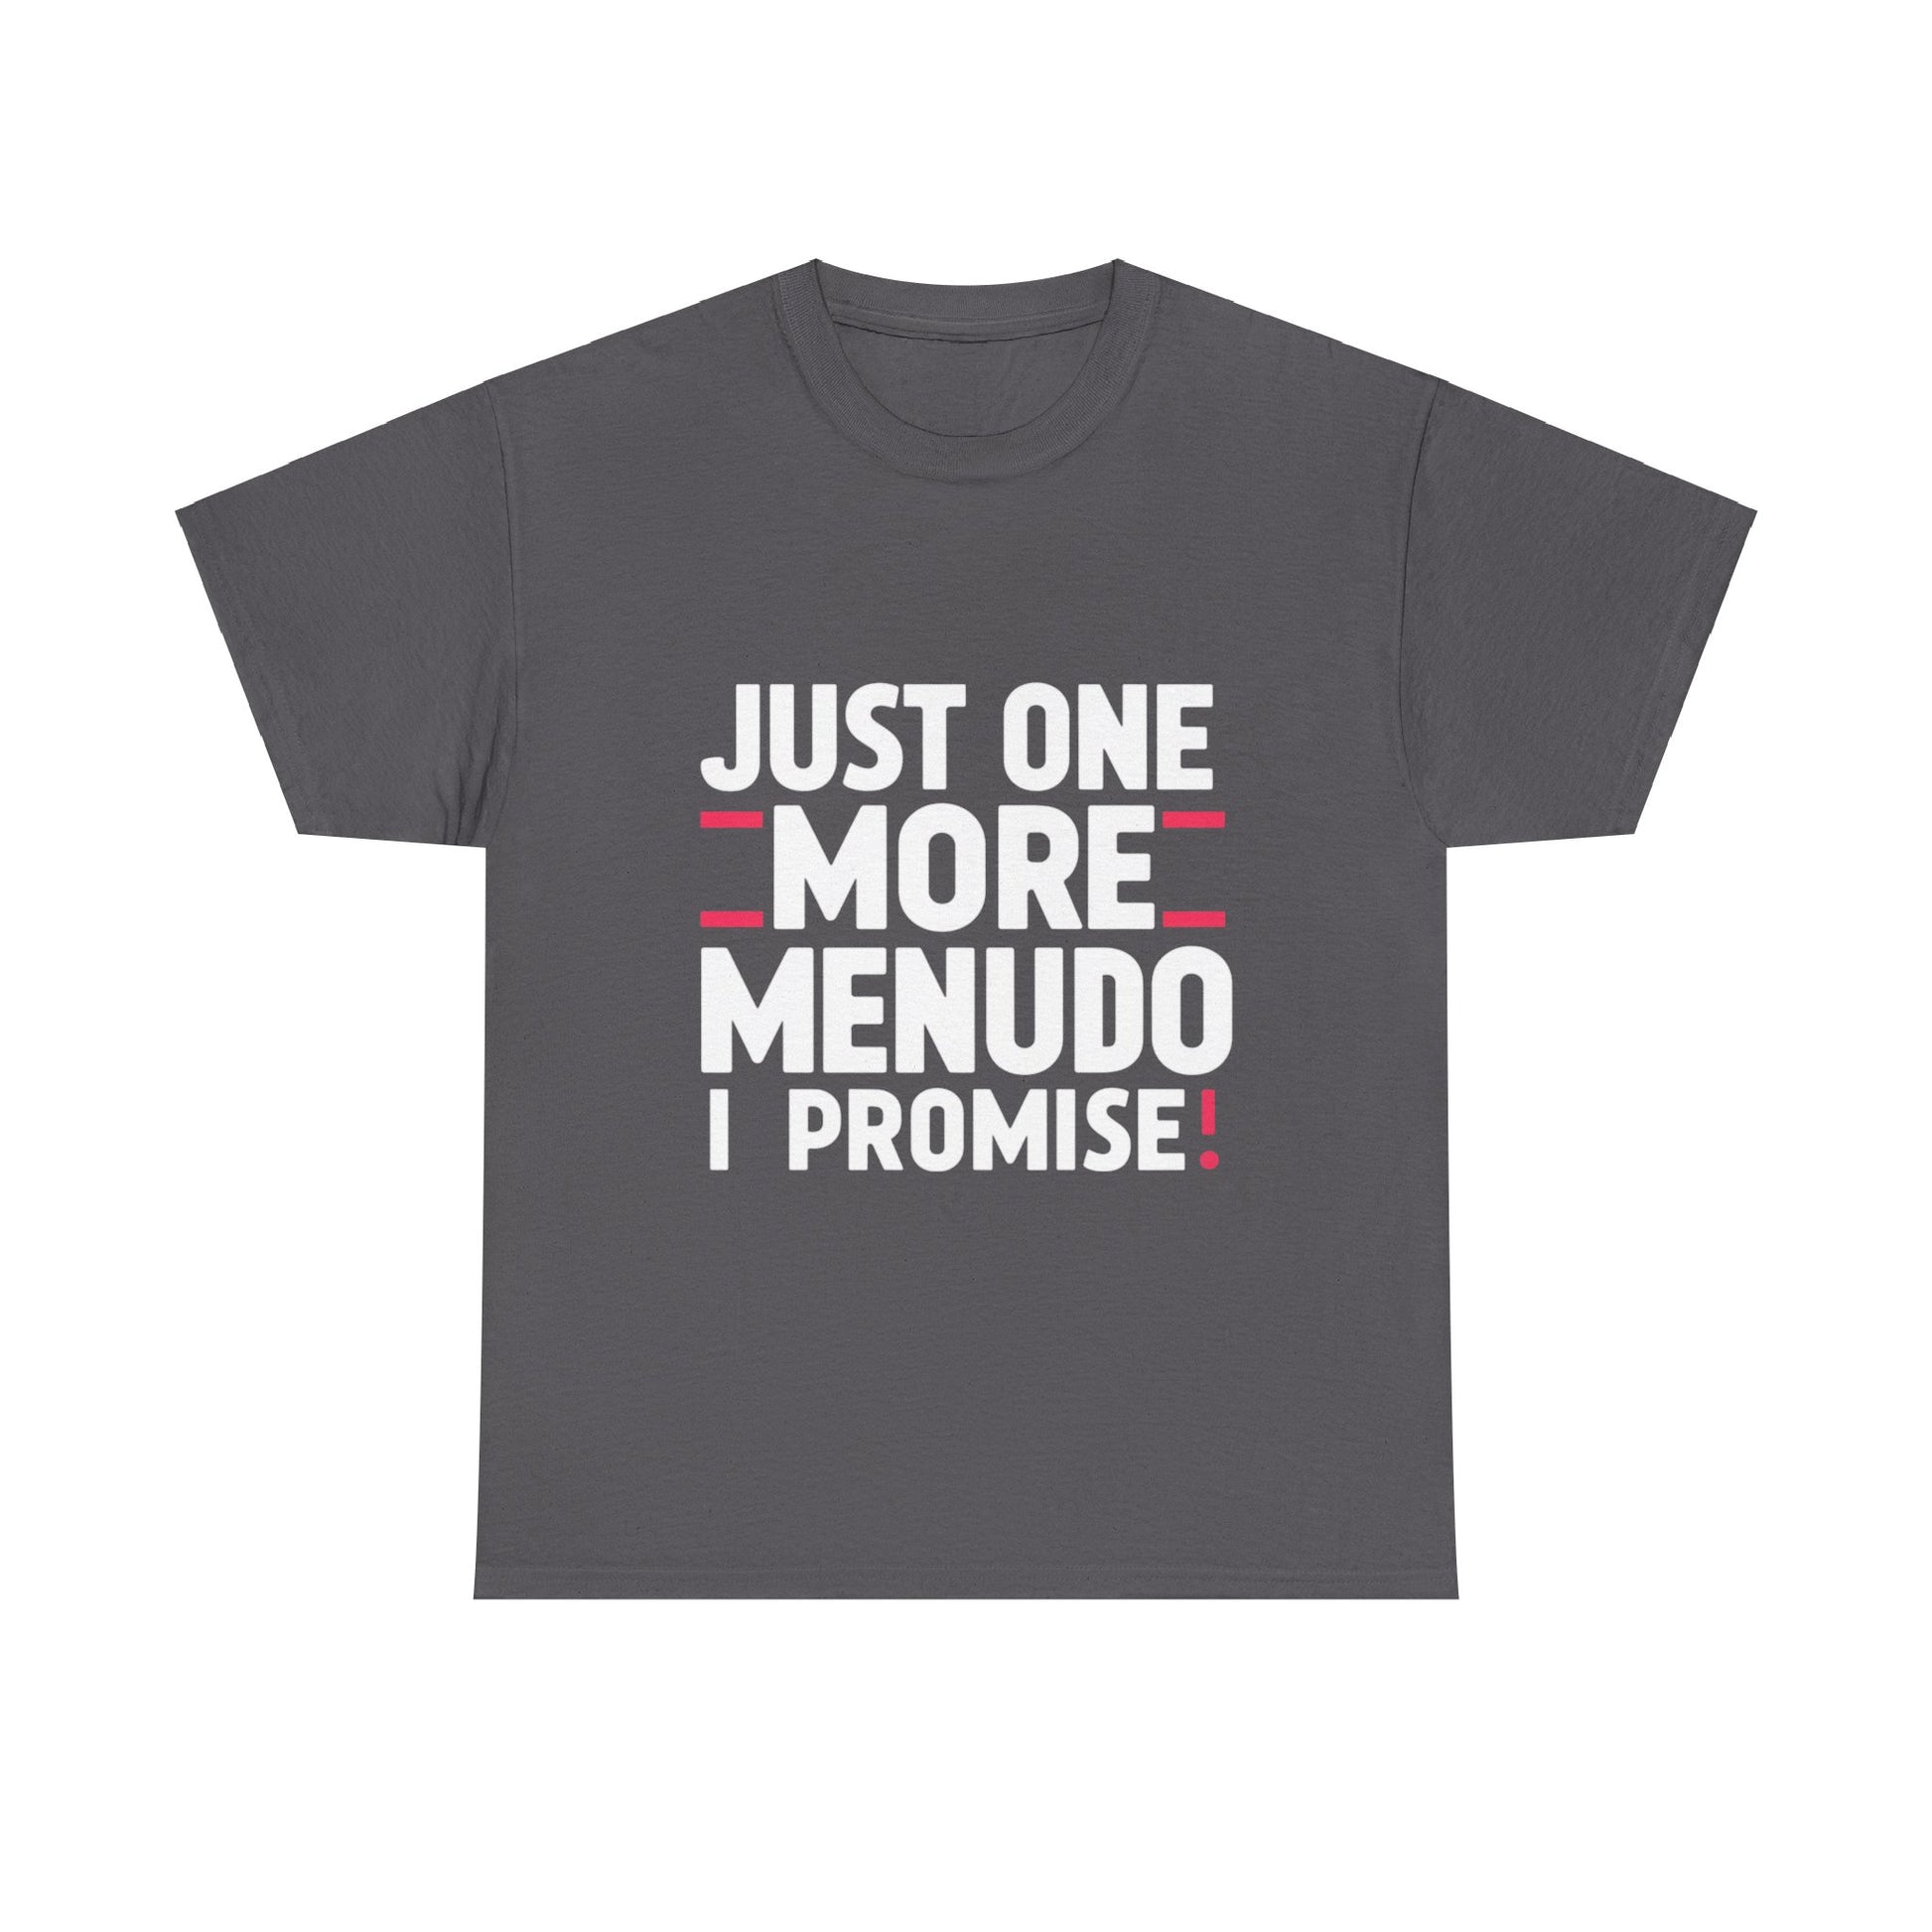 Just One More Menudo I Promise Mexican Food Graphic Unisex Heavy Cotton Tee Cotton Funny Humorous Graphic Soft Premium Unisex Men Women Charcoal T-shirt Birthday Gift-2